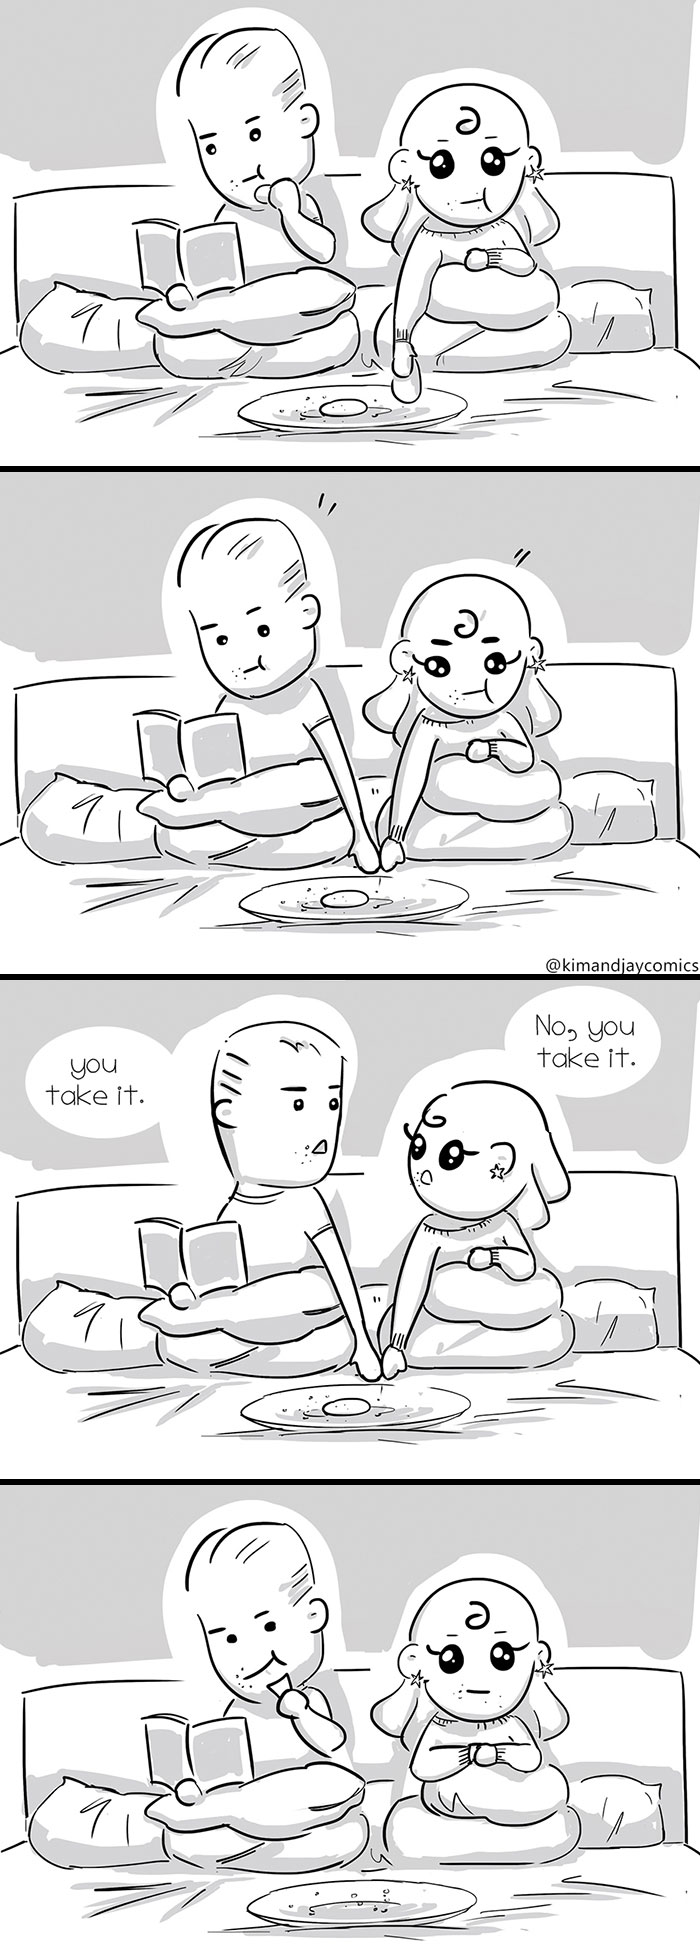 I Illustrated My Relationship With My Fiancée In These 14 Cute And Funny Comics